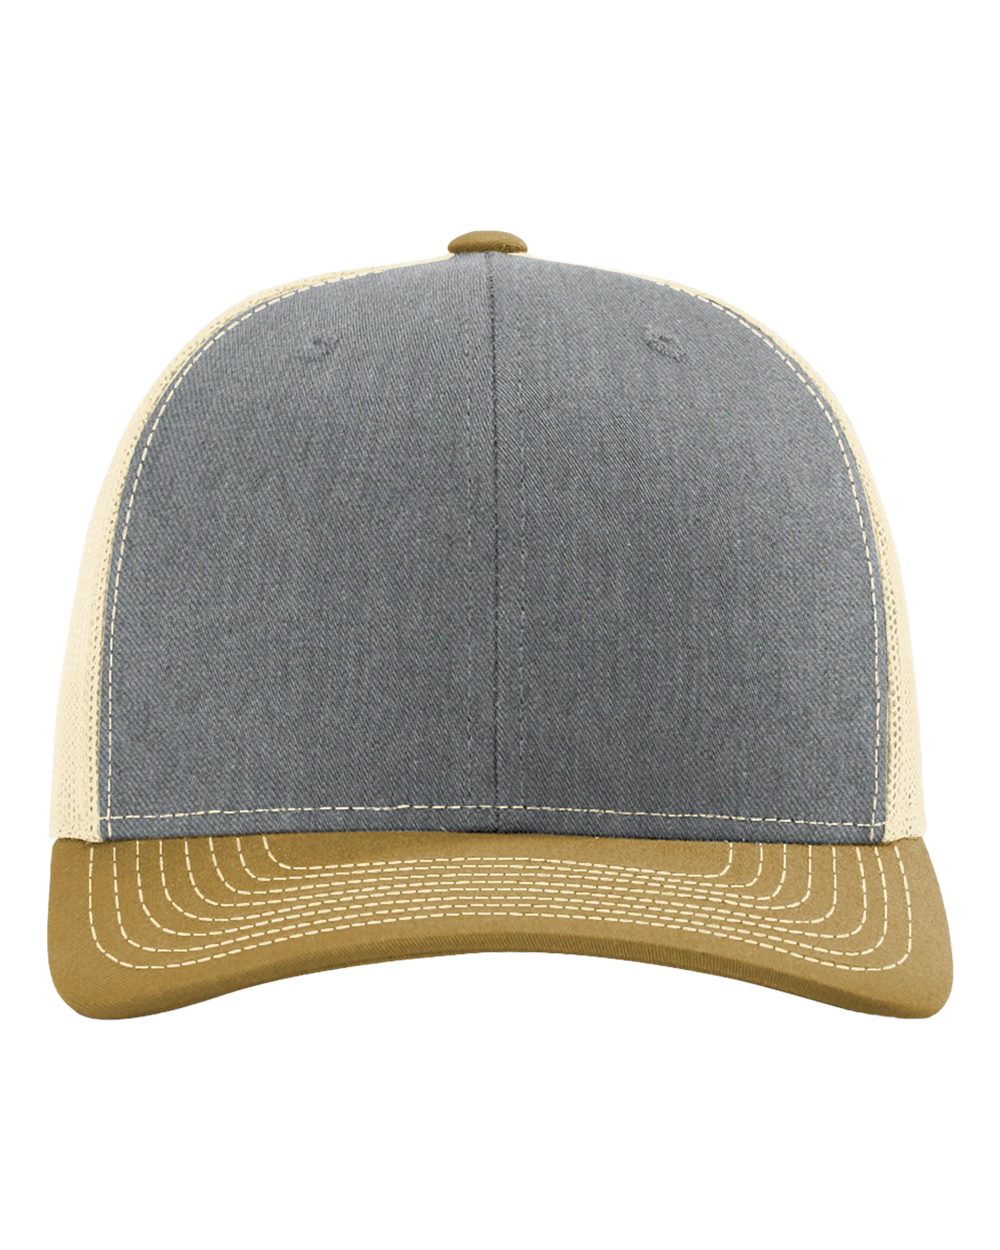 click to view Heather Grey/ Birch/ Amber Gold